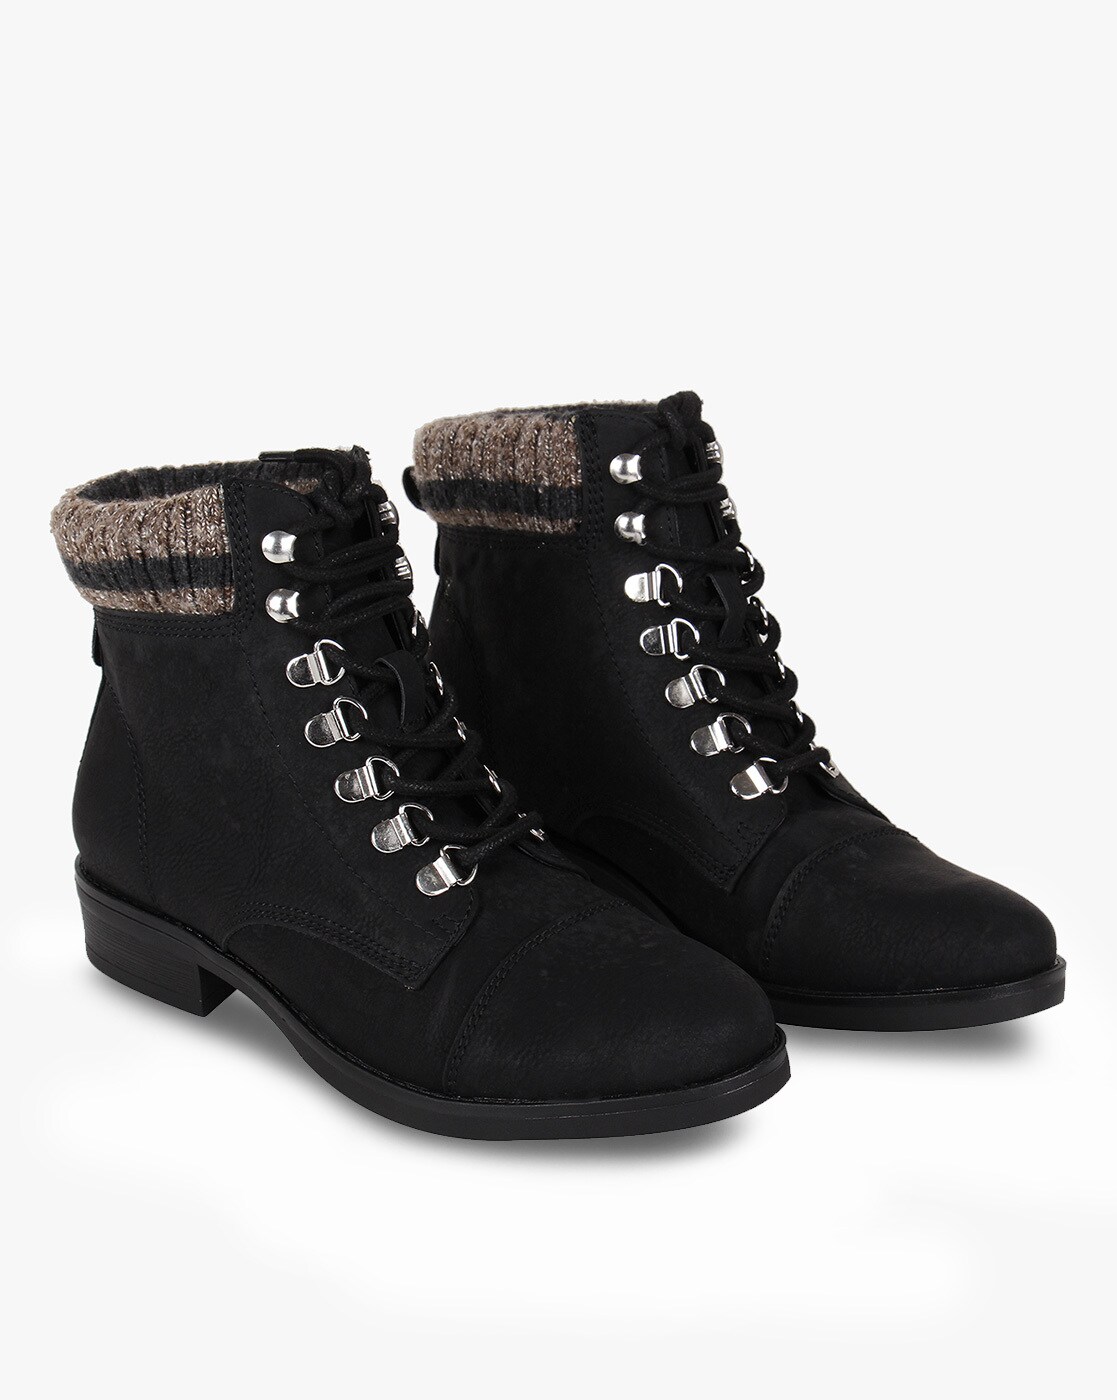 steve madden lace up booties